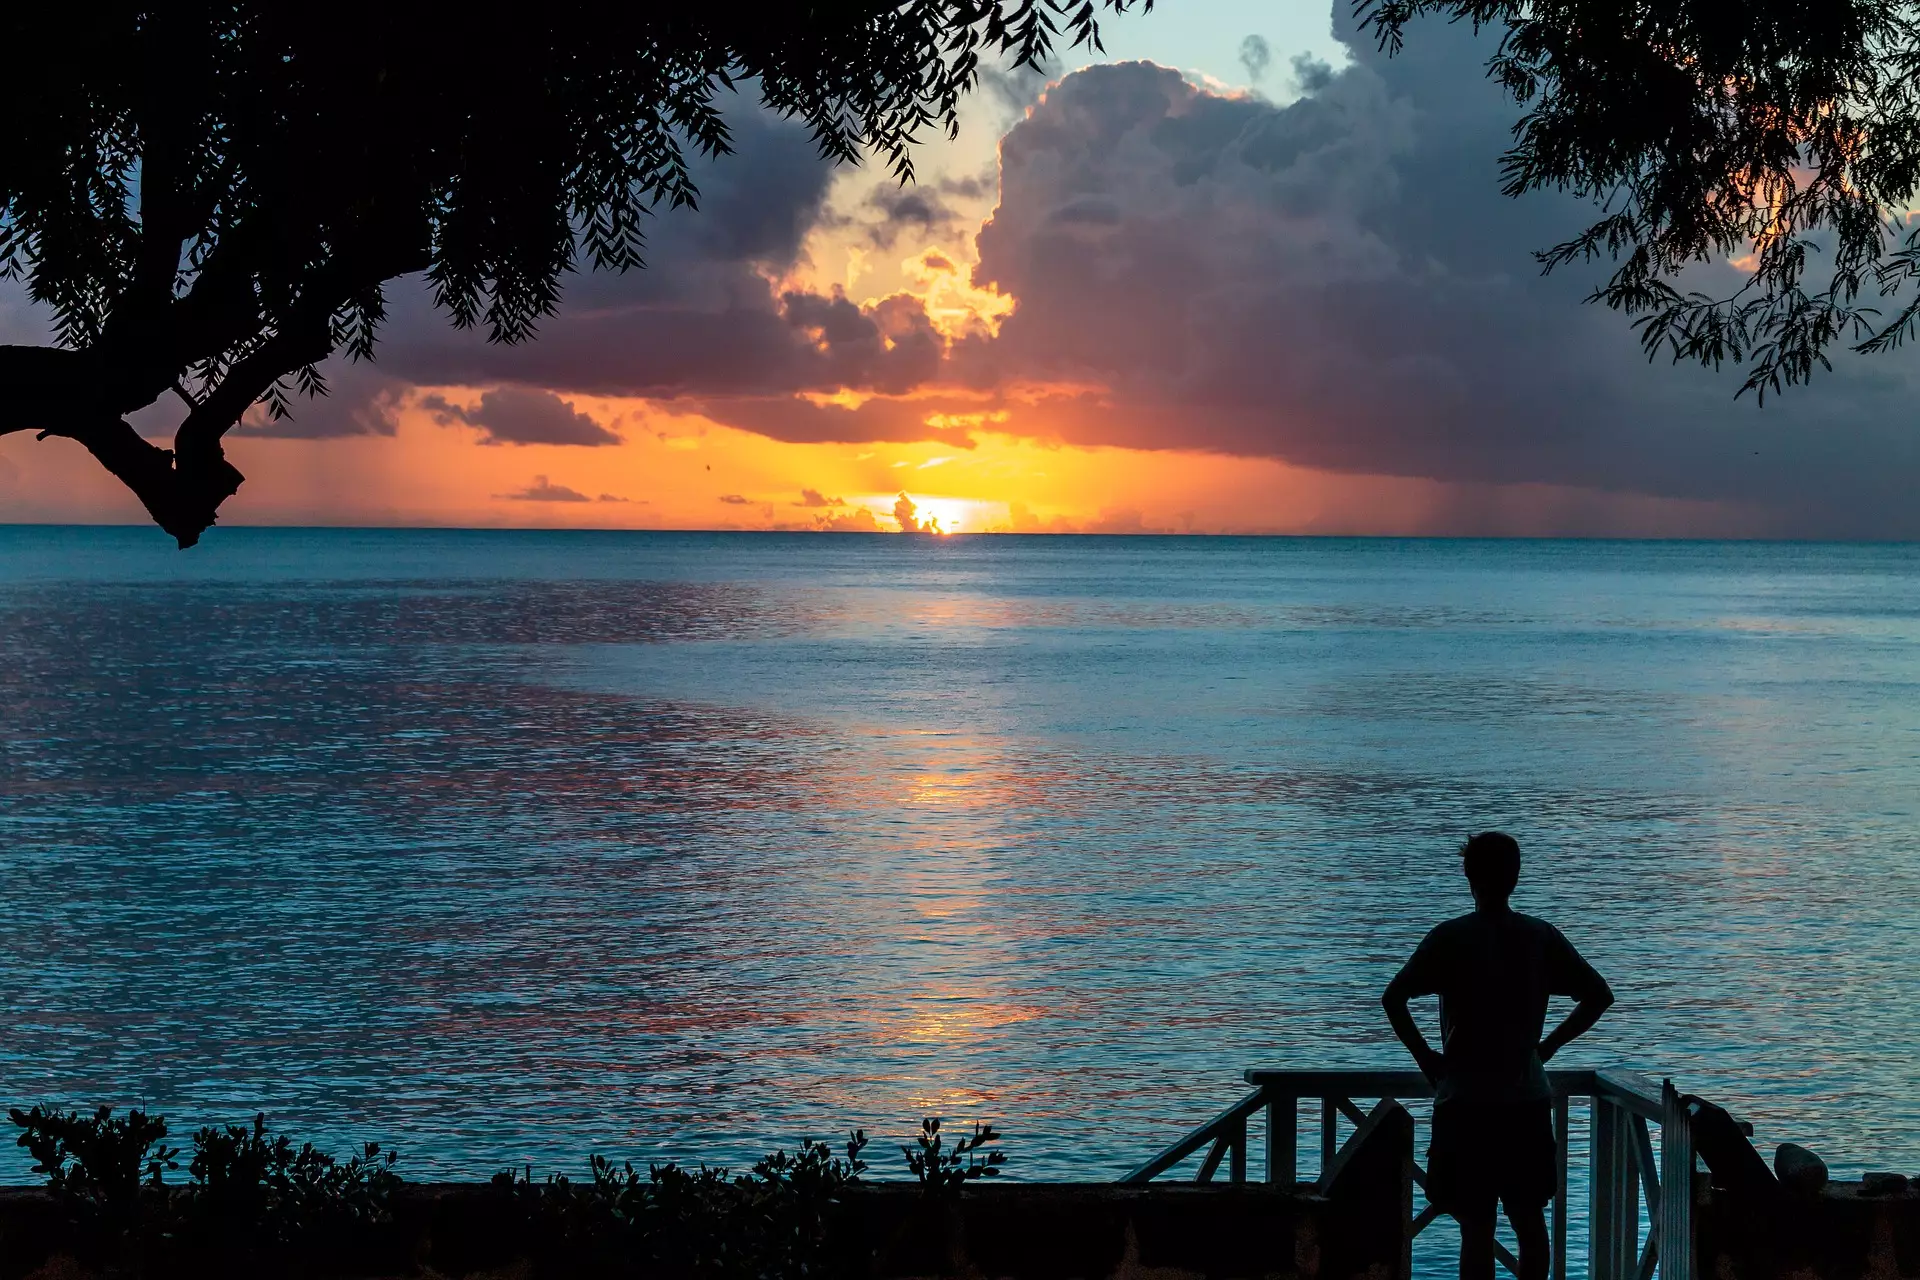 You're bound to see some stunning sunsets in Barbados (